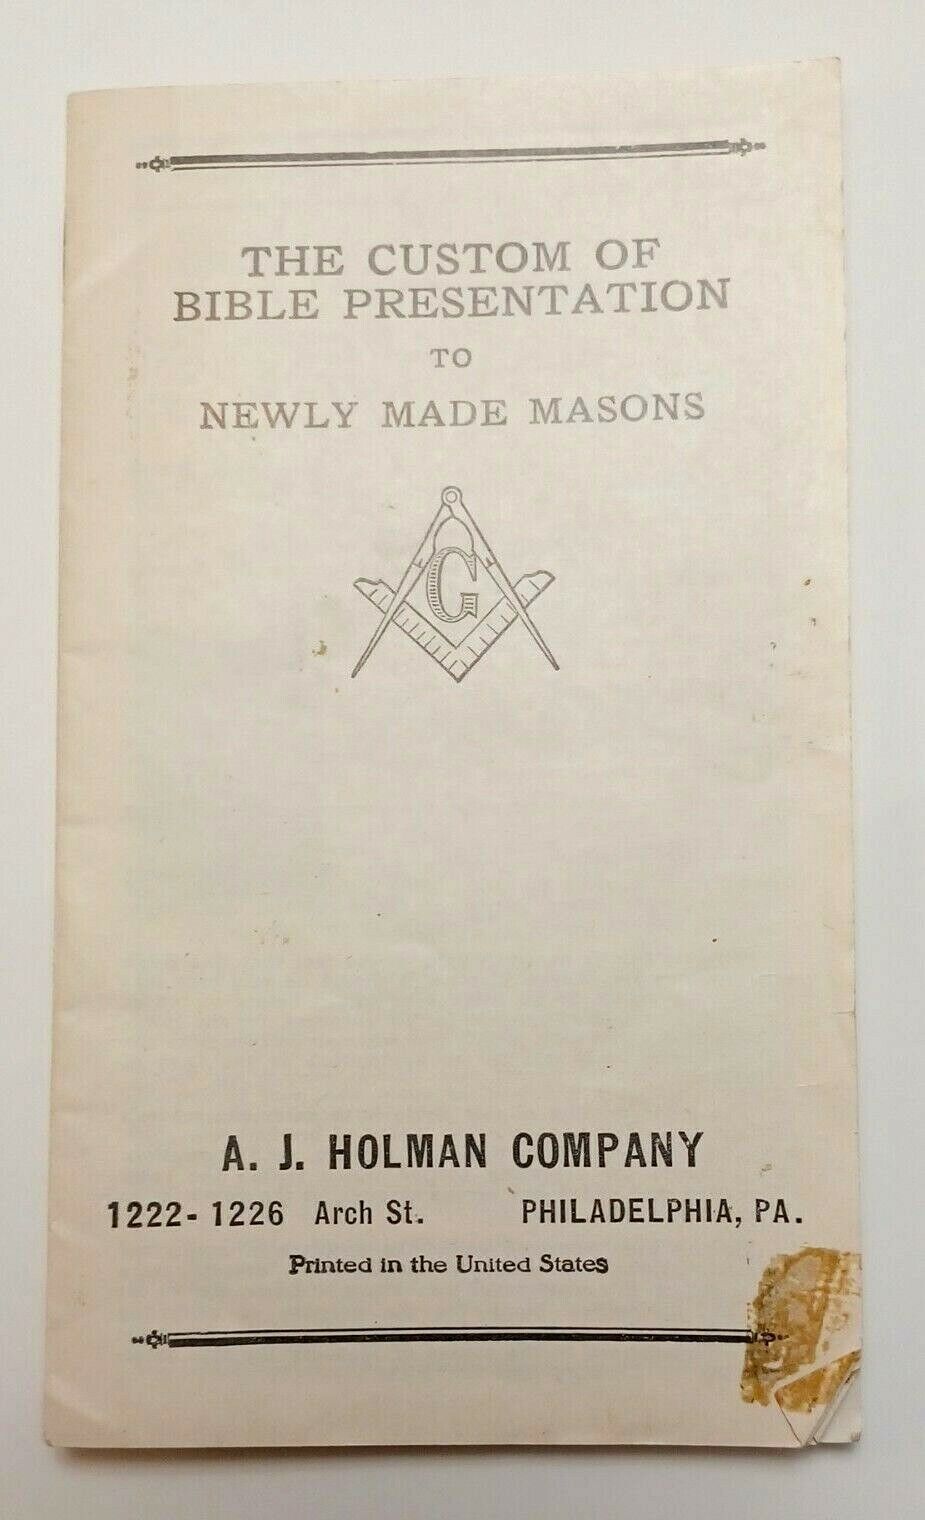 Primary image for 1920s Custom of Bible Presentation to Newly Made Masons Advertising Booklet